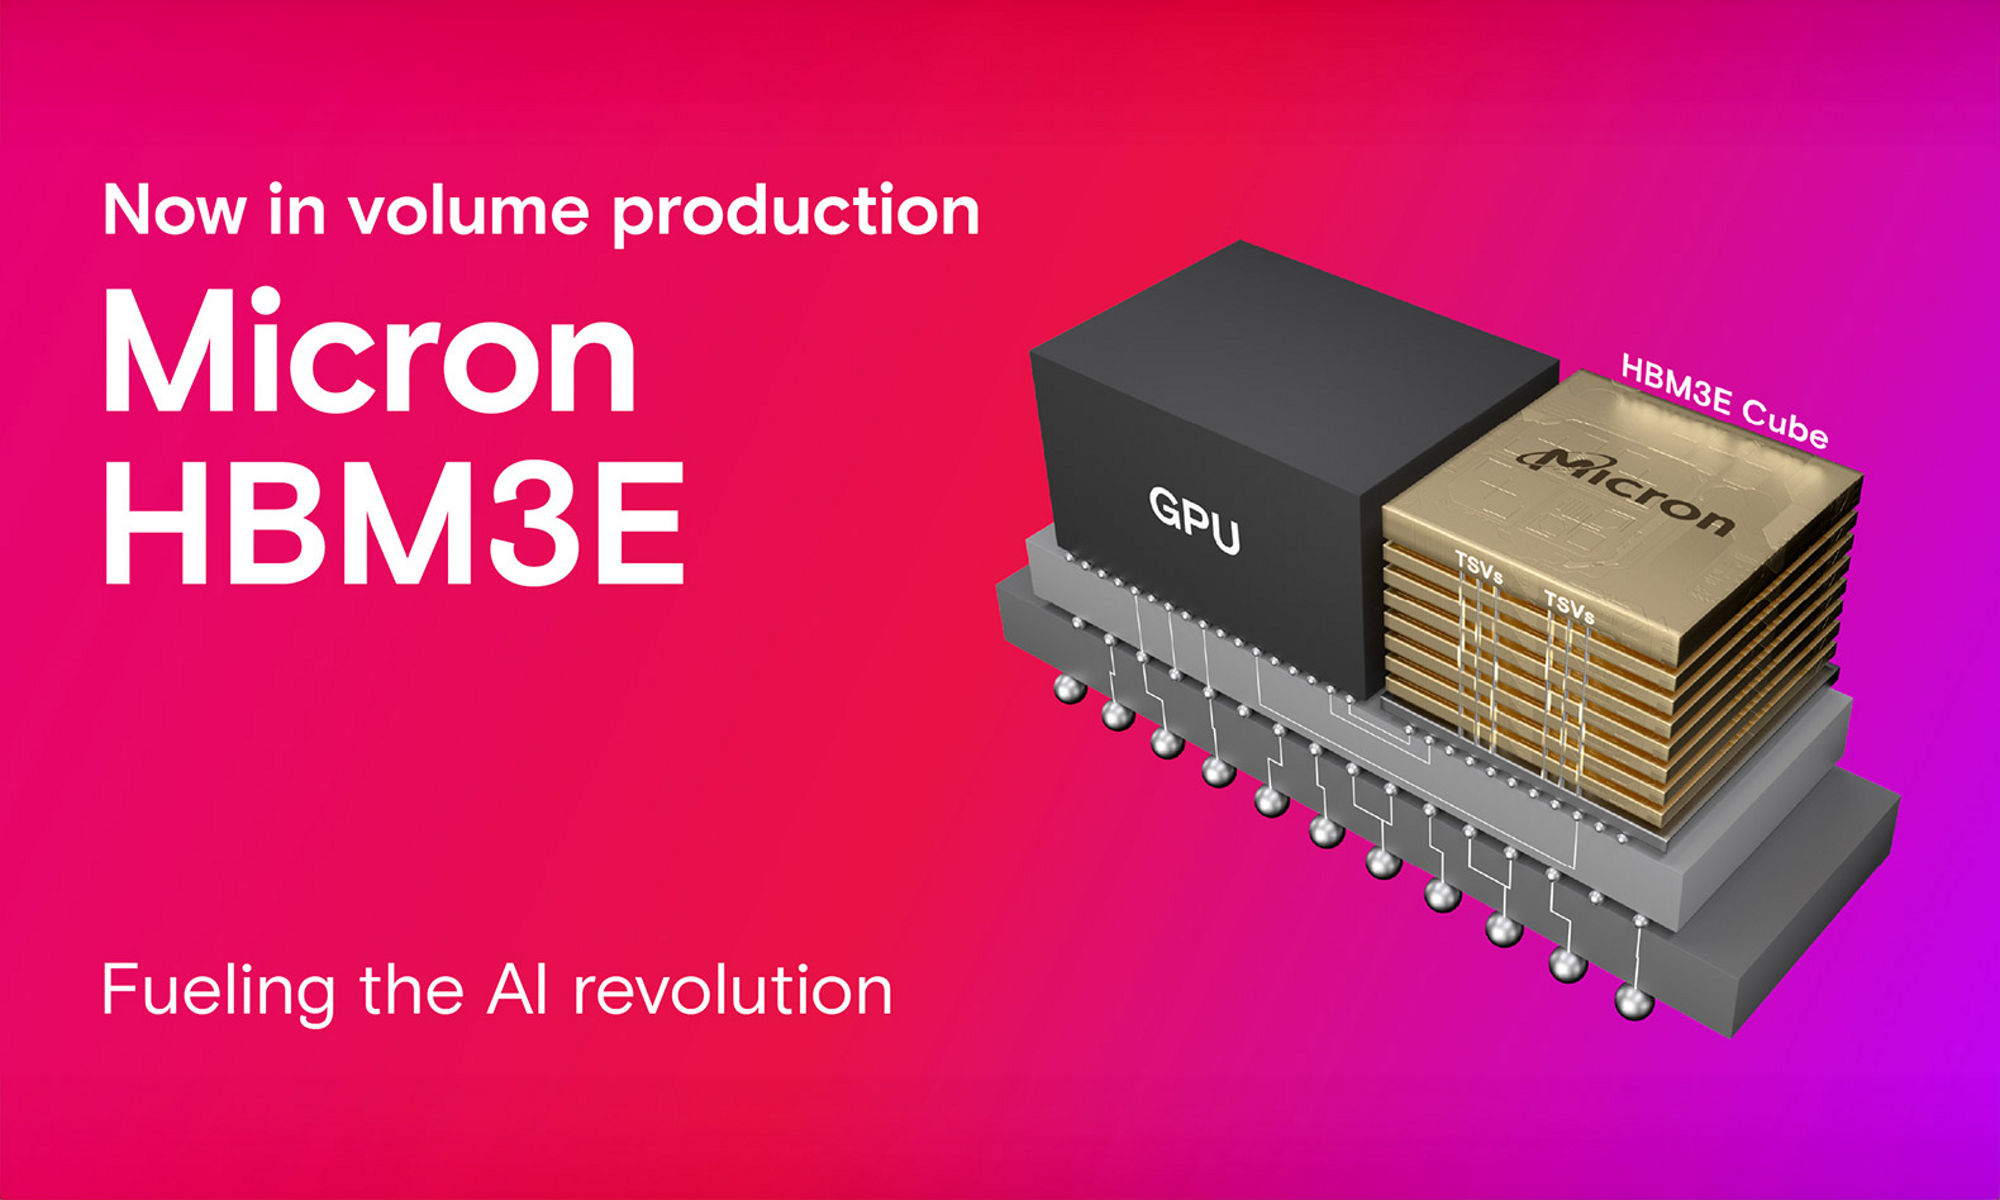 Micron's HBM3E, now in volume production. Fueling the AI revolution.